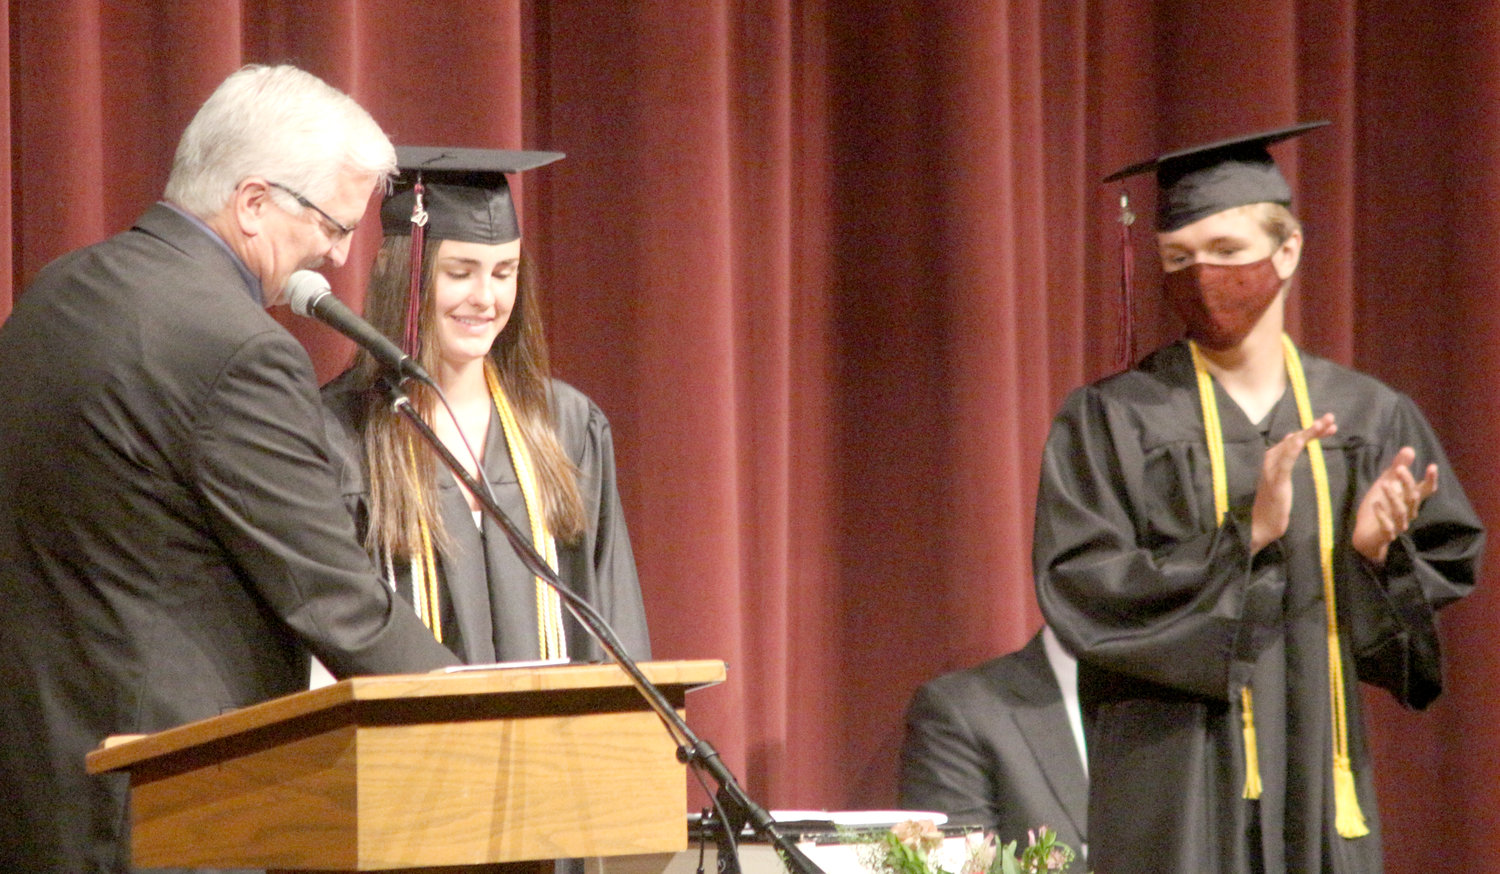 Hillcrest Academy Principal Dwight Gingerich (left) congratulates salutatorian Mia Graber and valedictorian Jesse Slater during Sunday’s commencement ceremony in Celebration Hall.